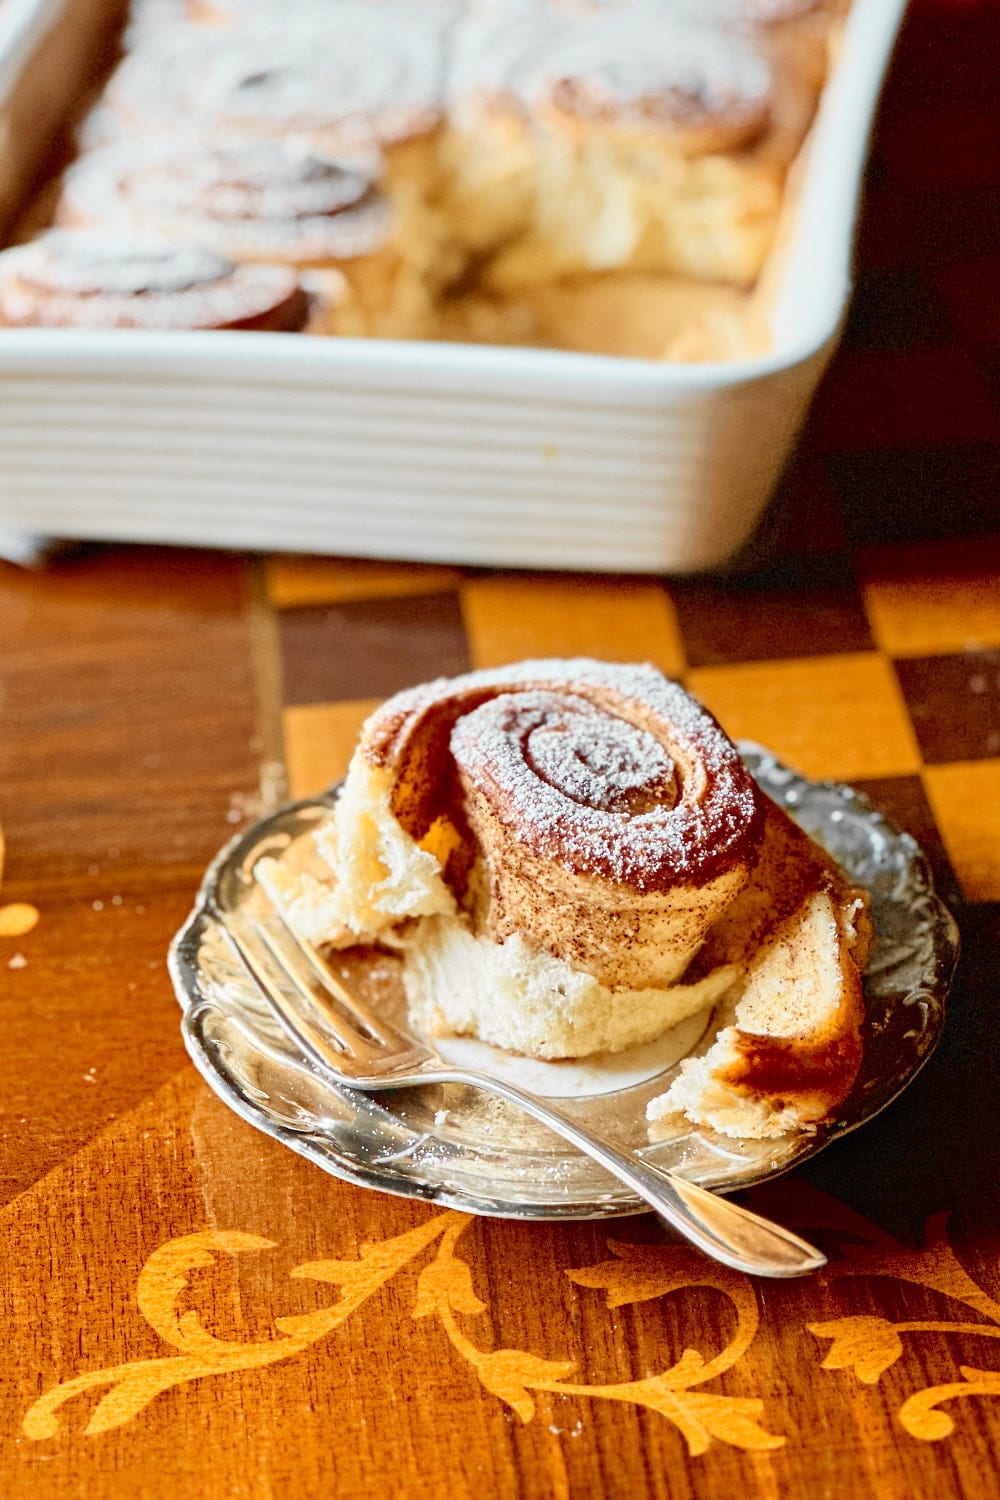 A fluffy sourdough cinnamon roll on a small plate with a silver fork.